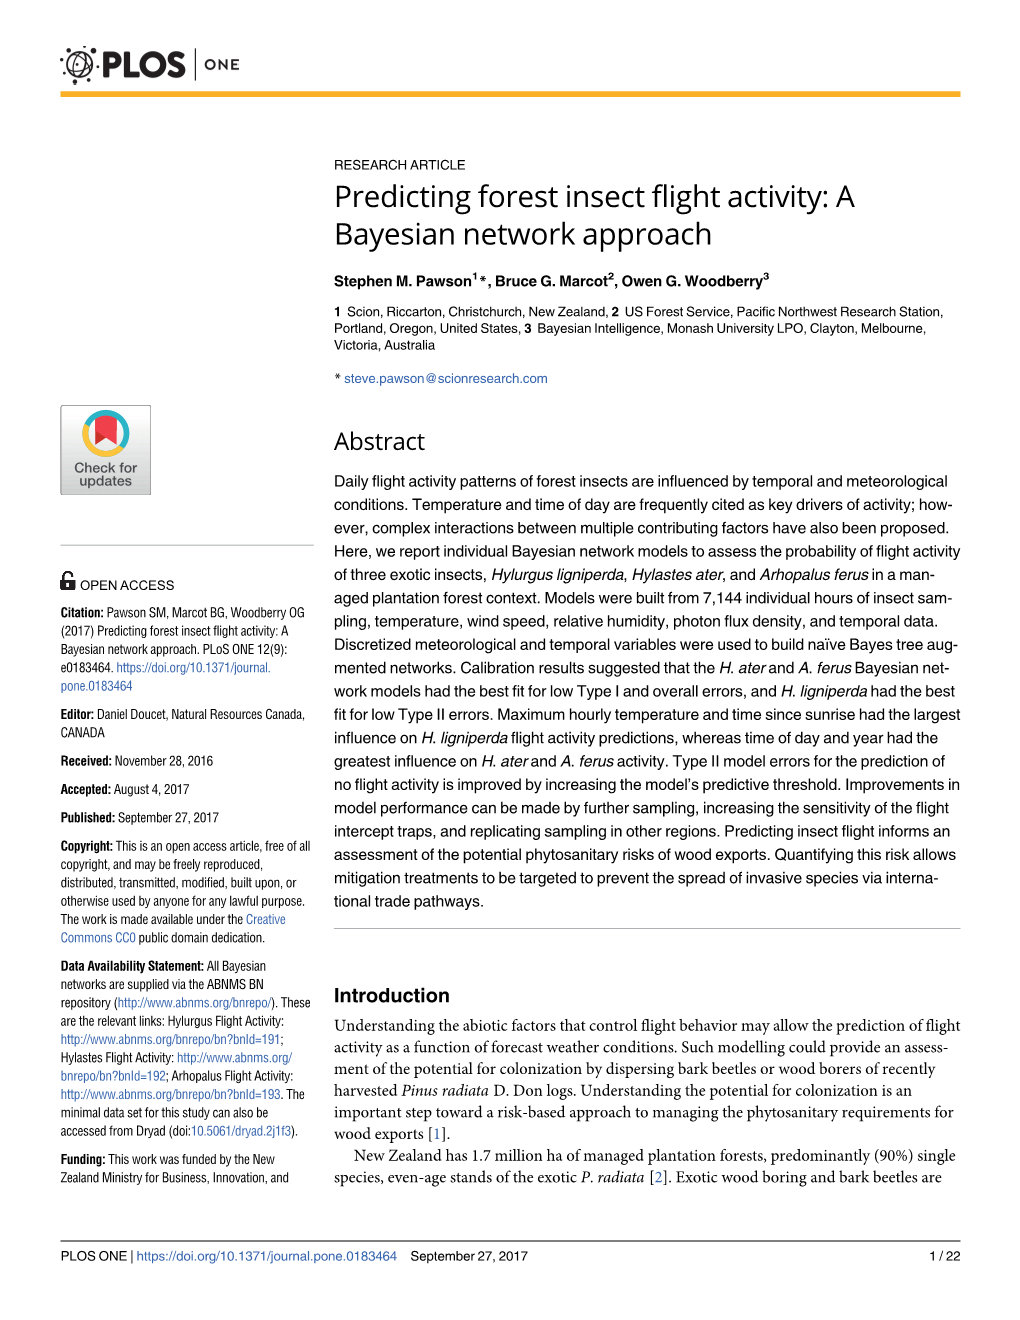 Predicting Forest Insect Flight Activity: a Bayesian Network Approach